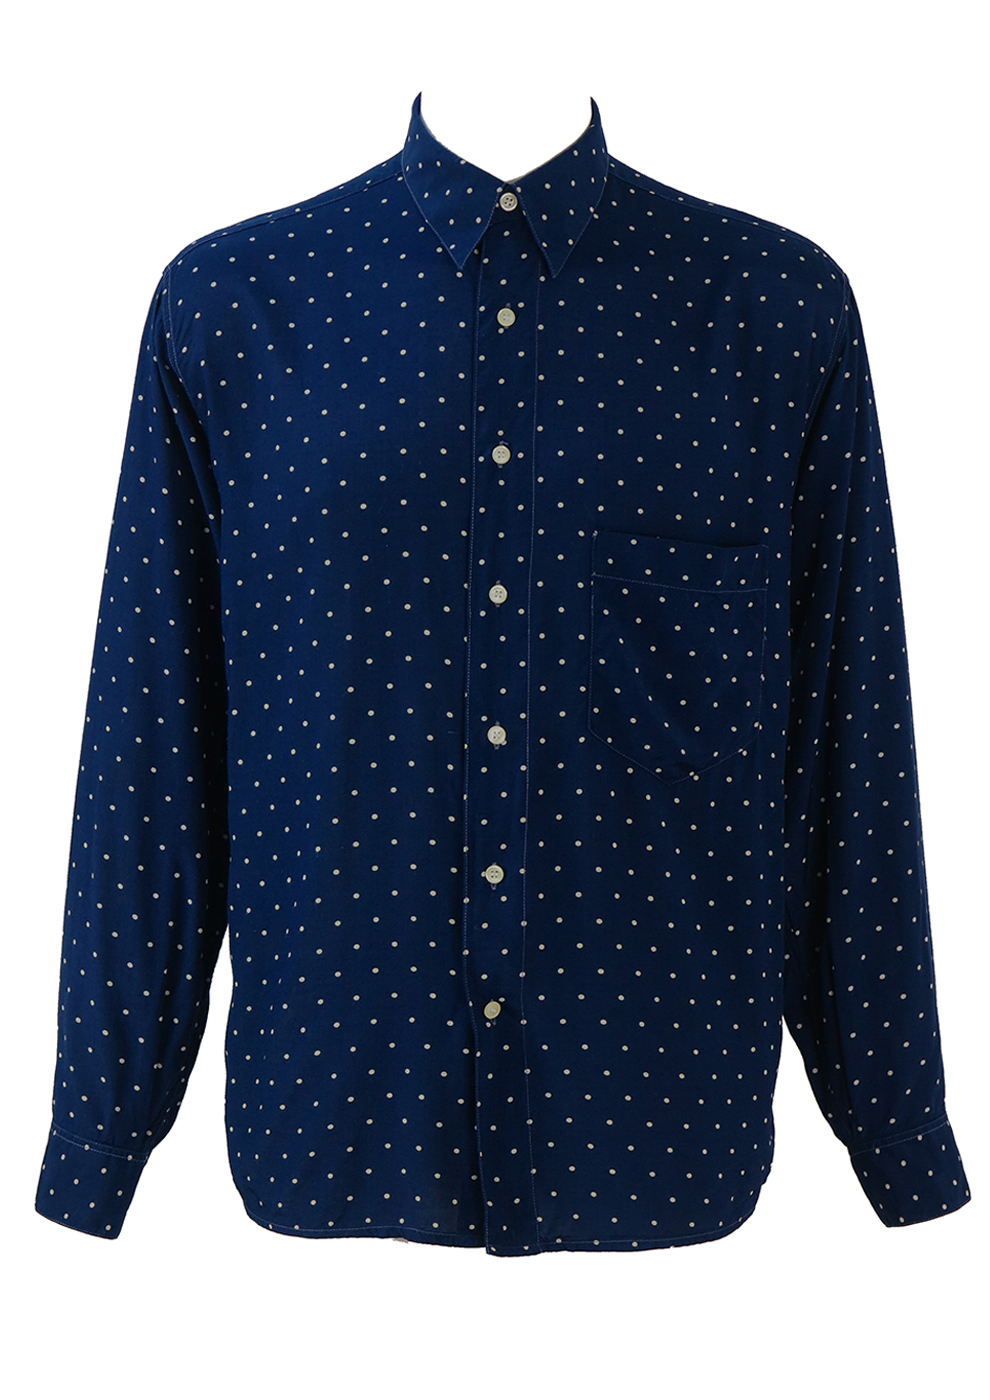 Navy Blue Shirt with White Polka Dots ...